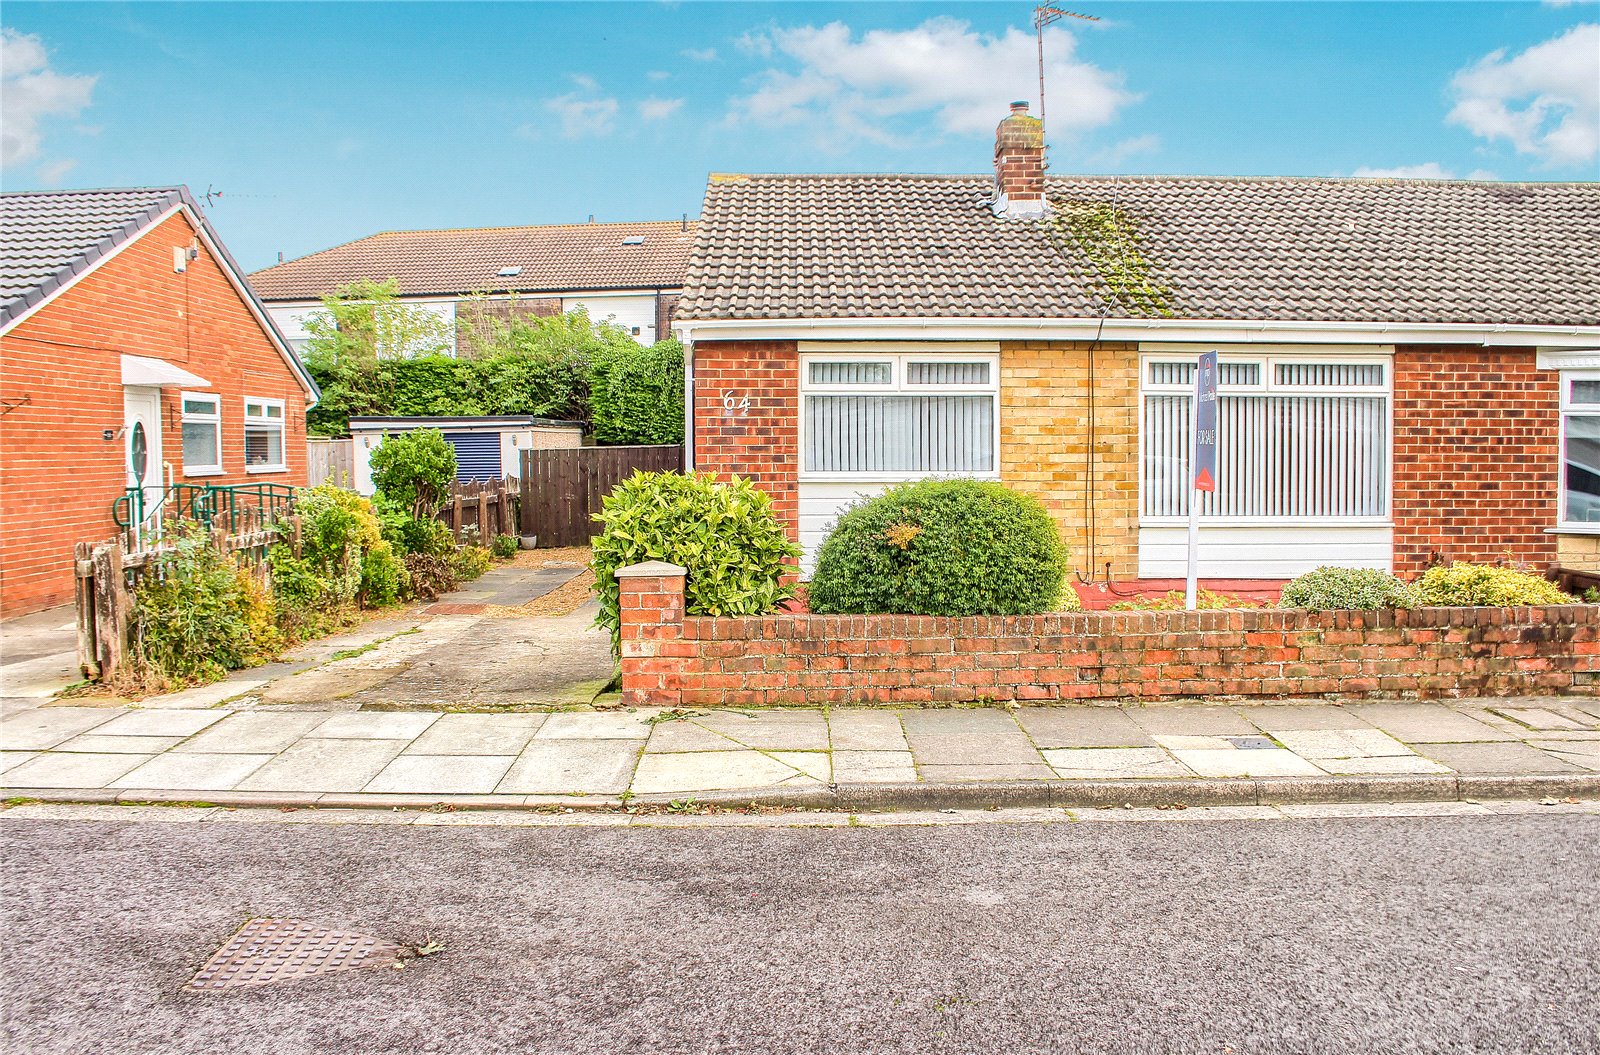 2 bed bungalow for sale in Wolviston Court, Billingham - Property Image 1